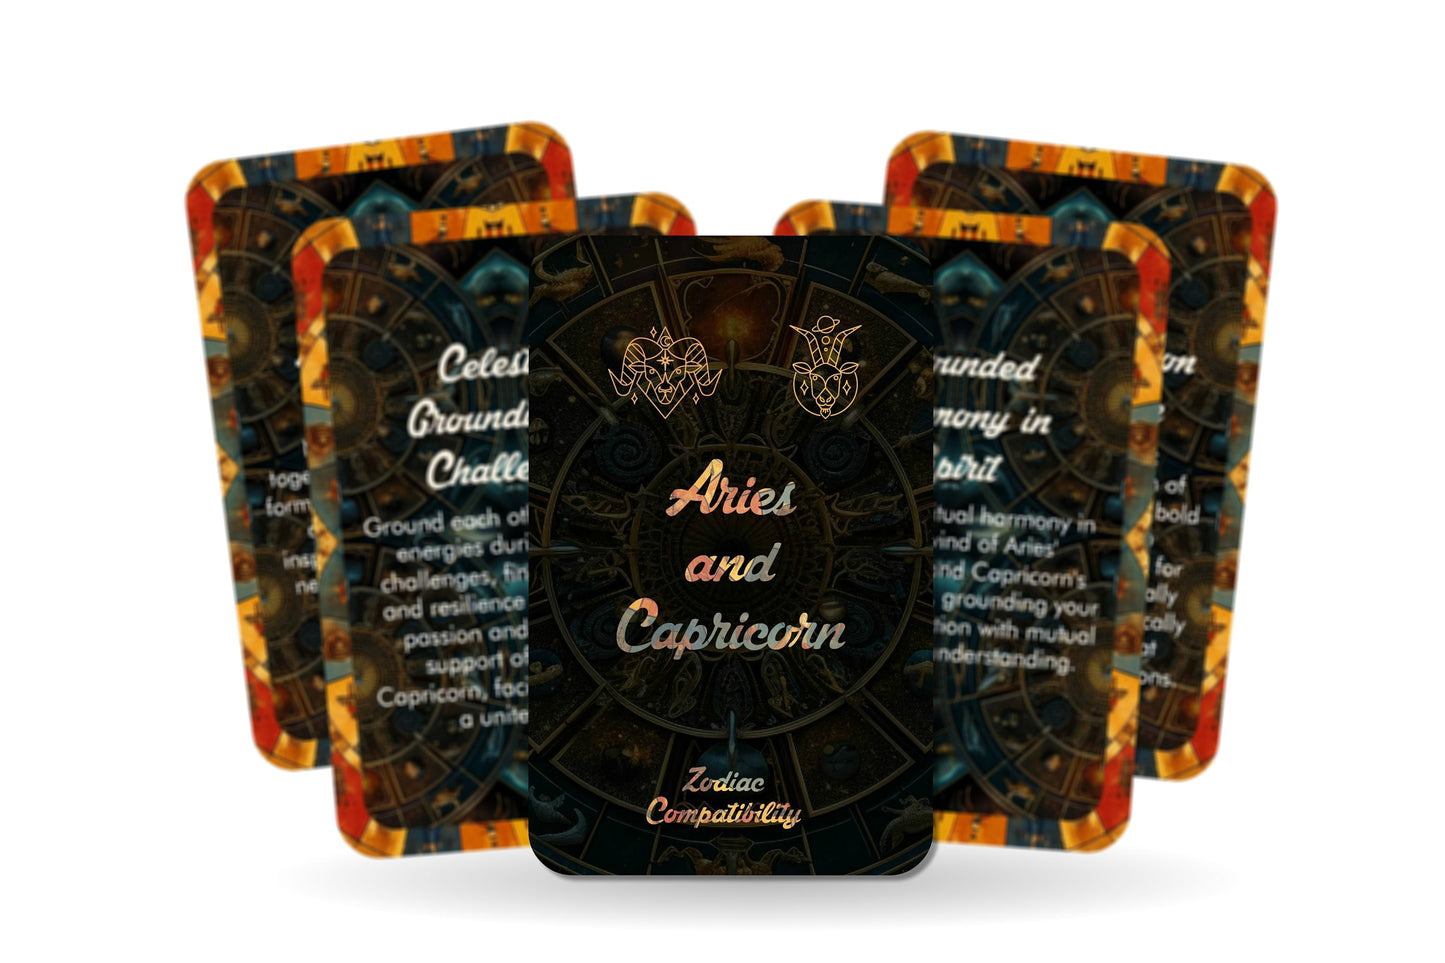 Aries and Capricorn - Zodiac Compatibility - Divination tools - Oracle cards - Star Sign Compatibility - Horoscope Compatibility Cards